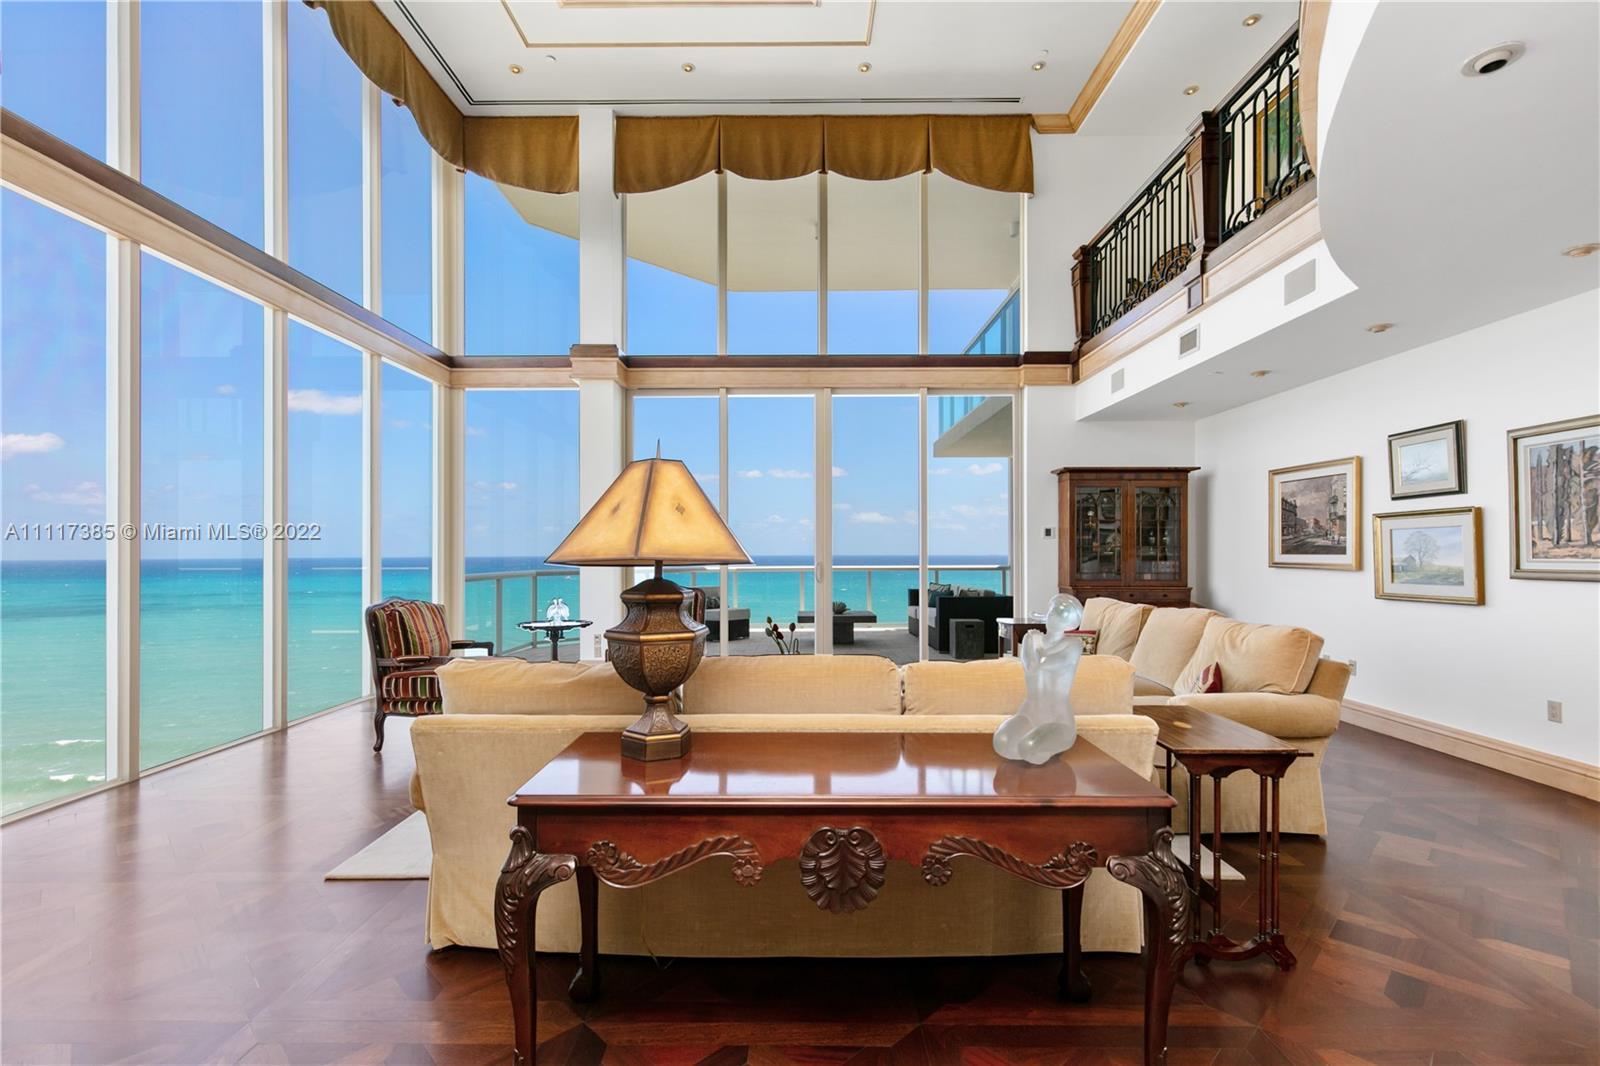 ***Price Reduction*** Magnificent 2-story, one-of-a-kind, beachfront penthouse unit located right on